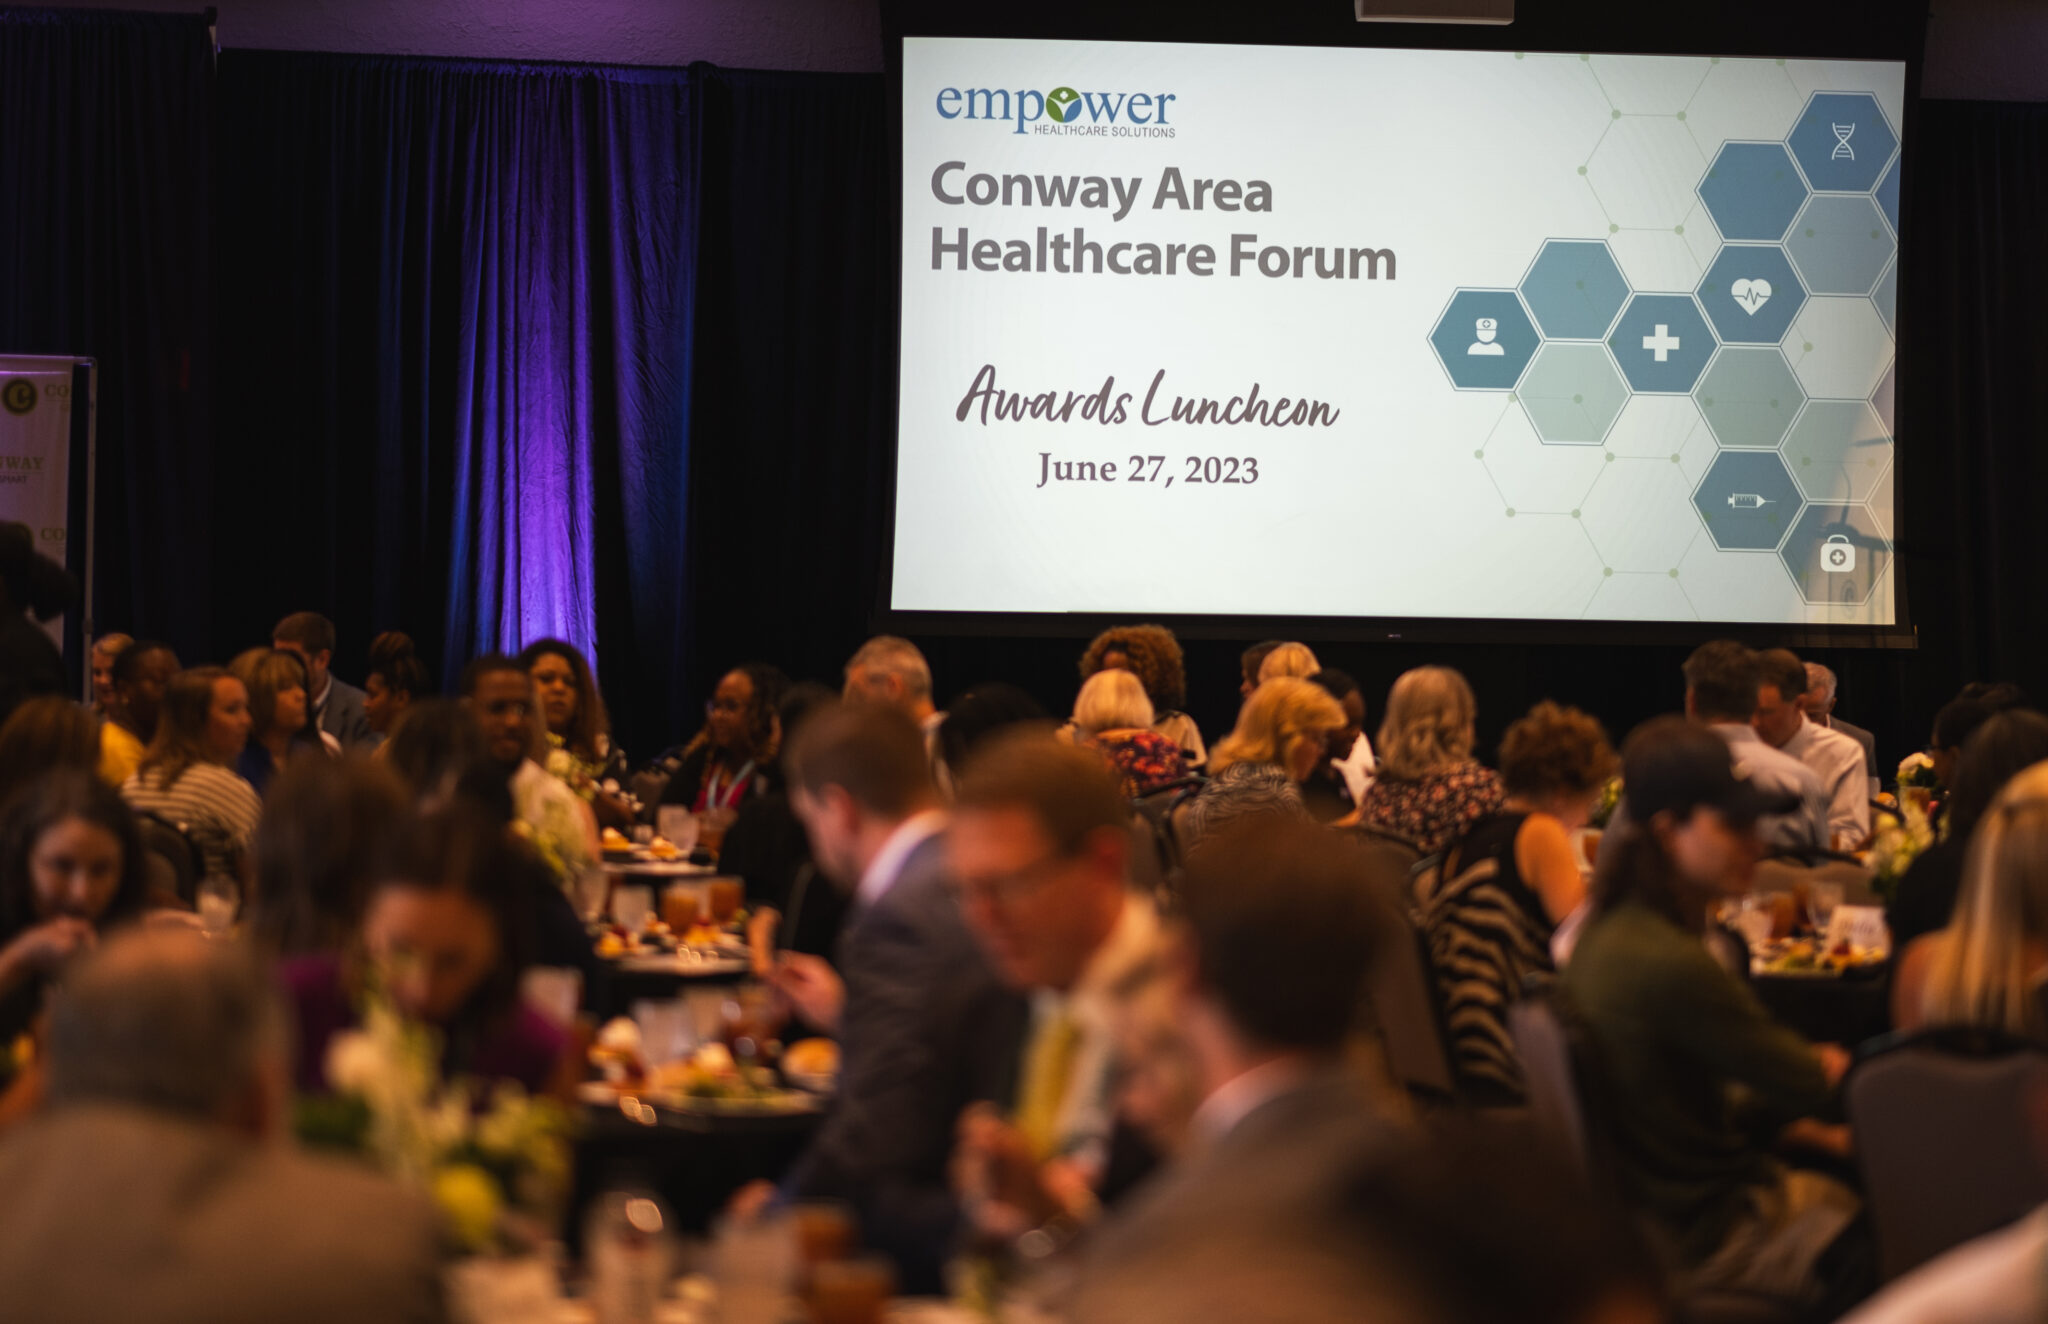 Attendees sitting at tables during the Conway Area Healthcare Forum Awards Luncheon held of June 27, 2023.